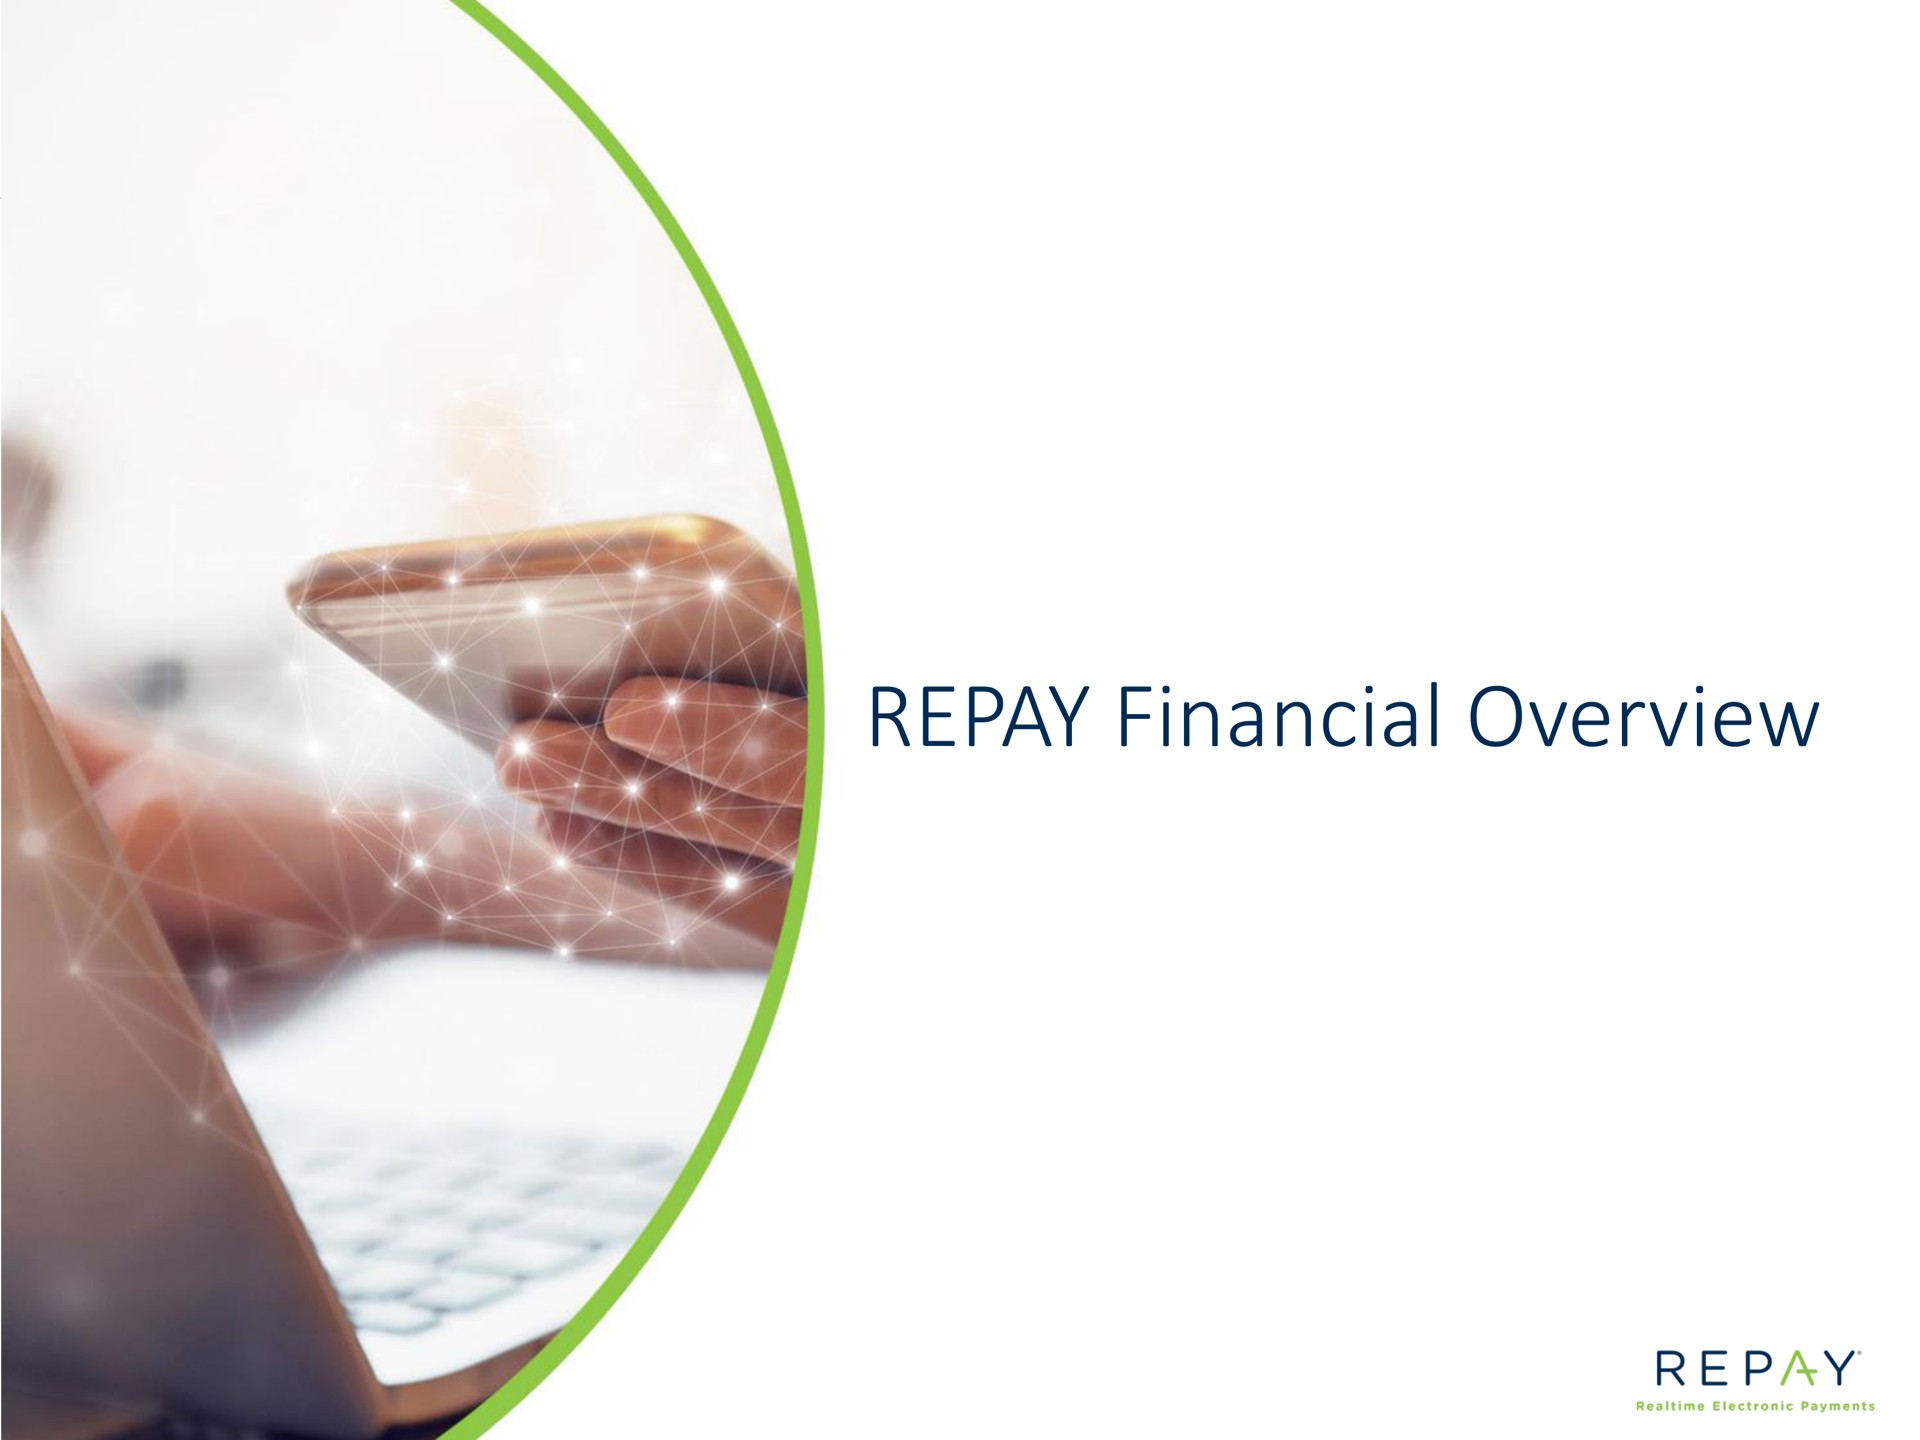 repay financial overview | Repay